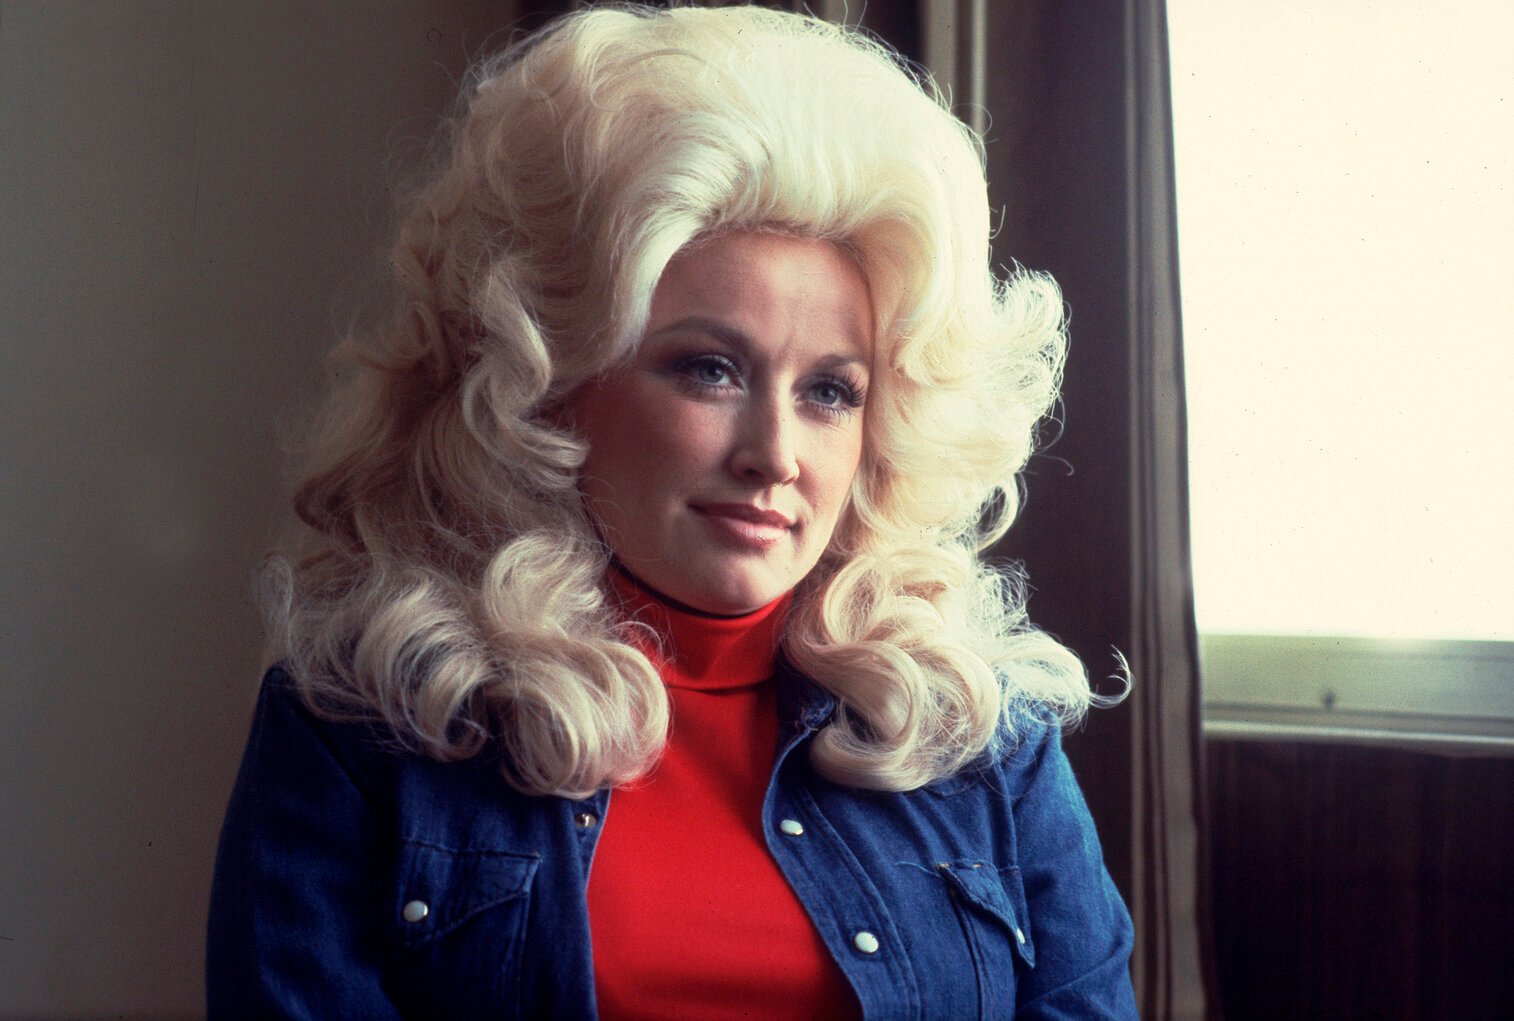 A close-up of Dolly Parton in 1977 in a red turtleneck and jean jacket.